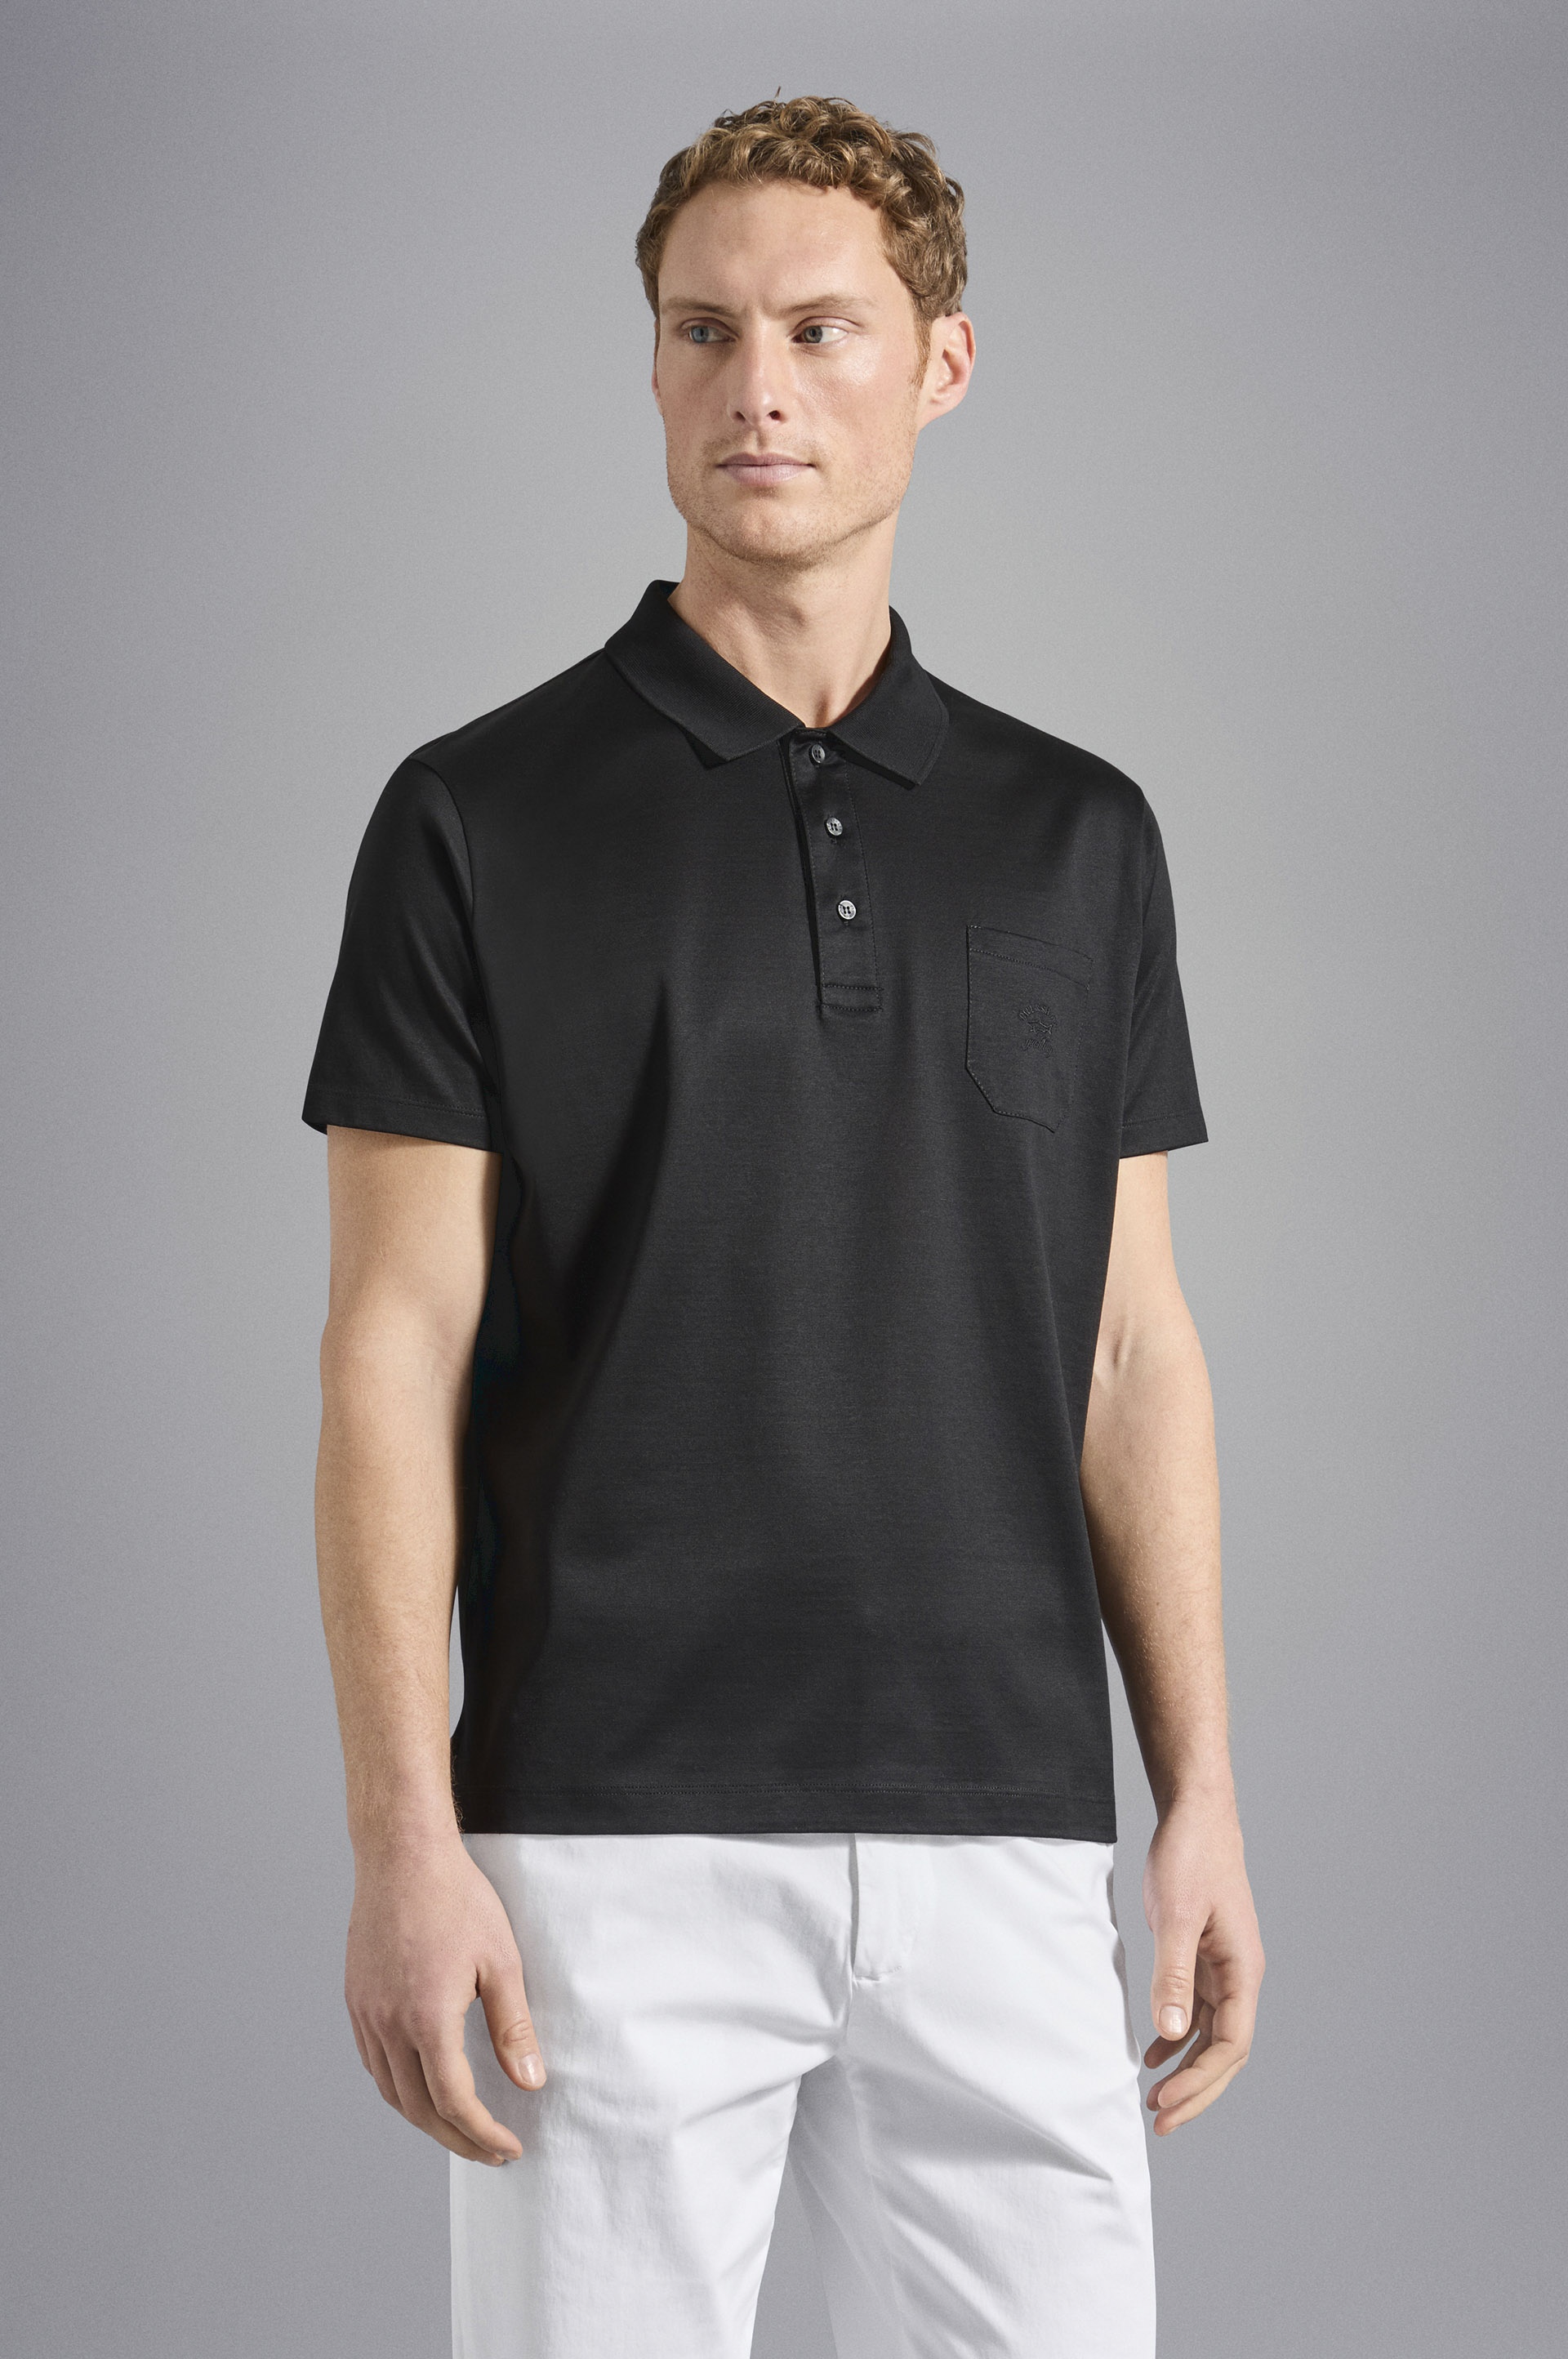 COTTON JERSEY POLO SHIRT WITH EMBROIDERED LOGO - 6